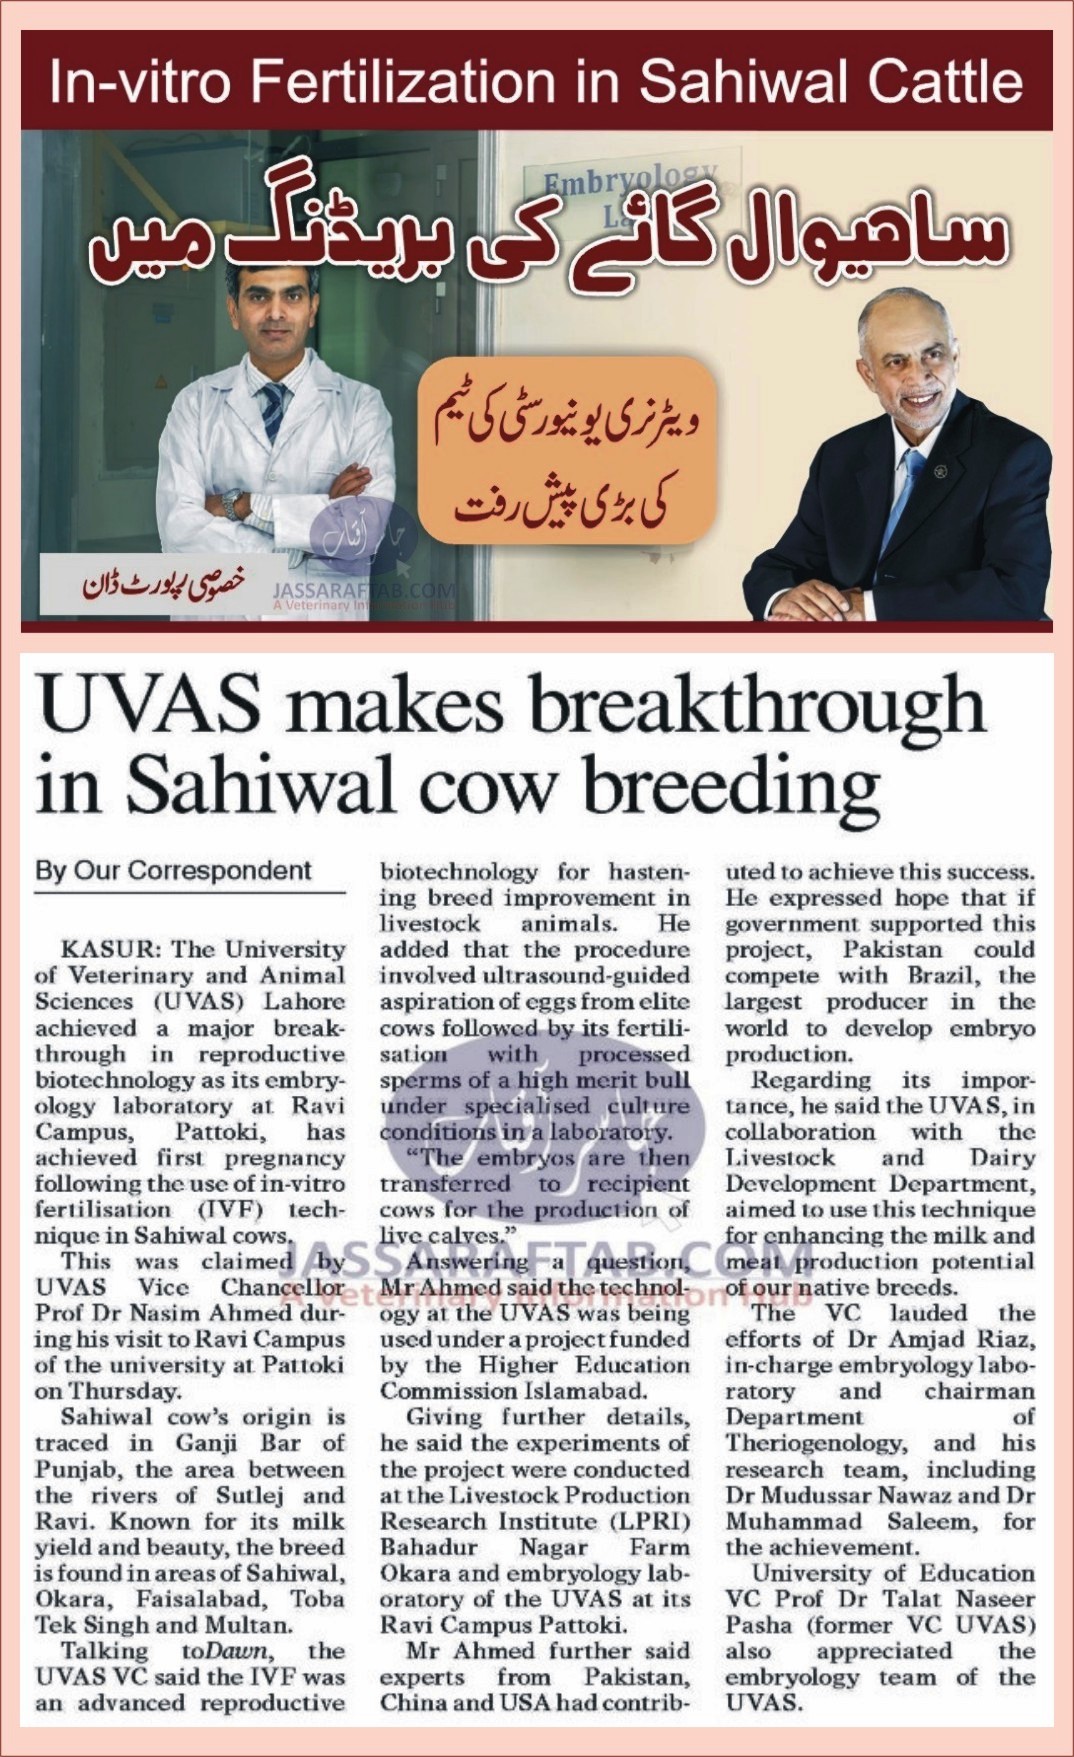 IVF in Sahiwal Cow | Embryo Transfer in Sahiwal Cattle